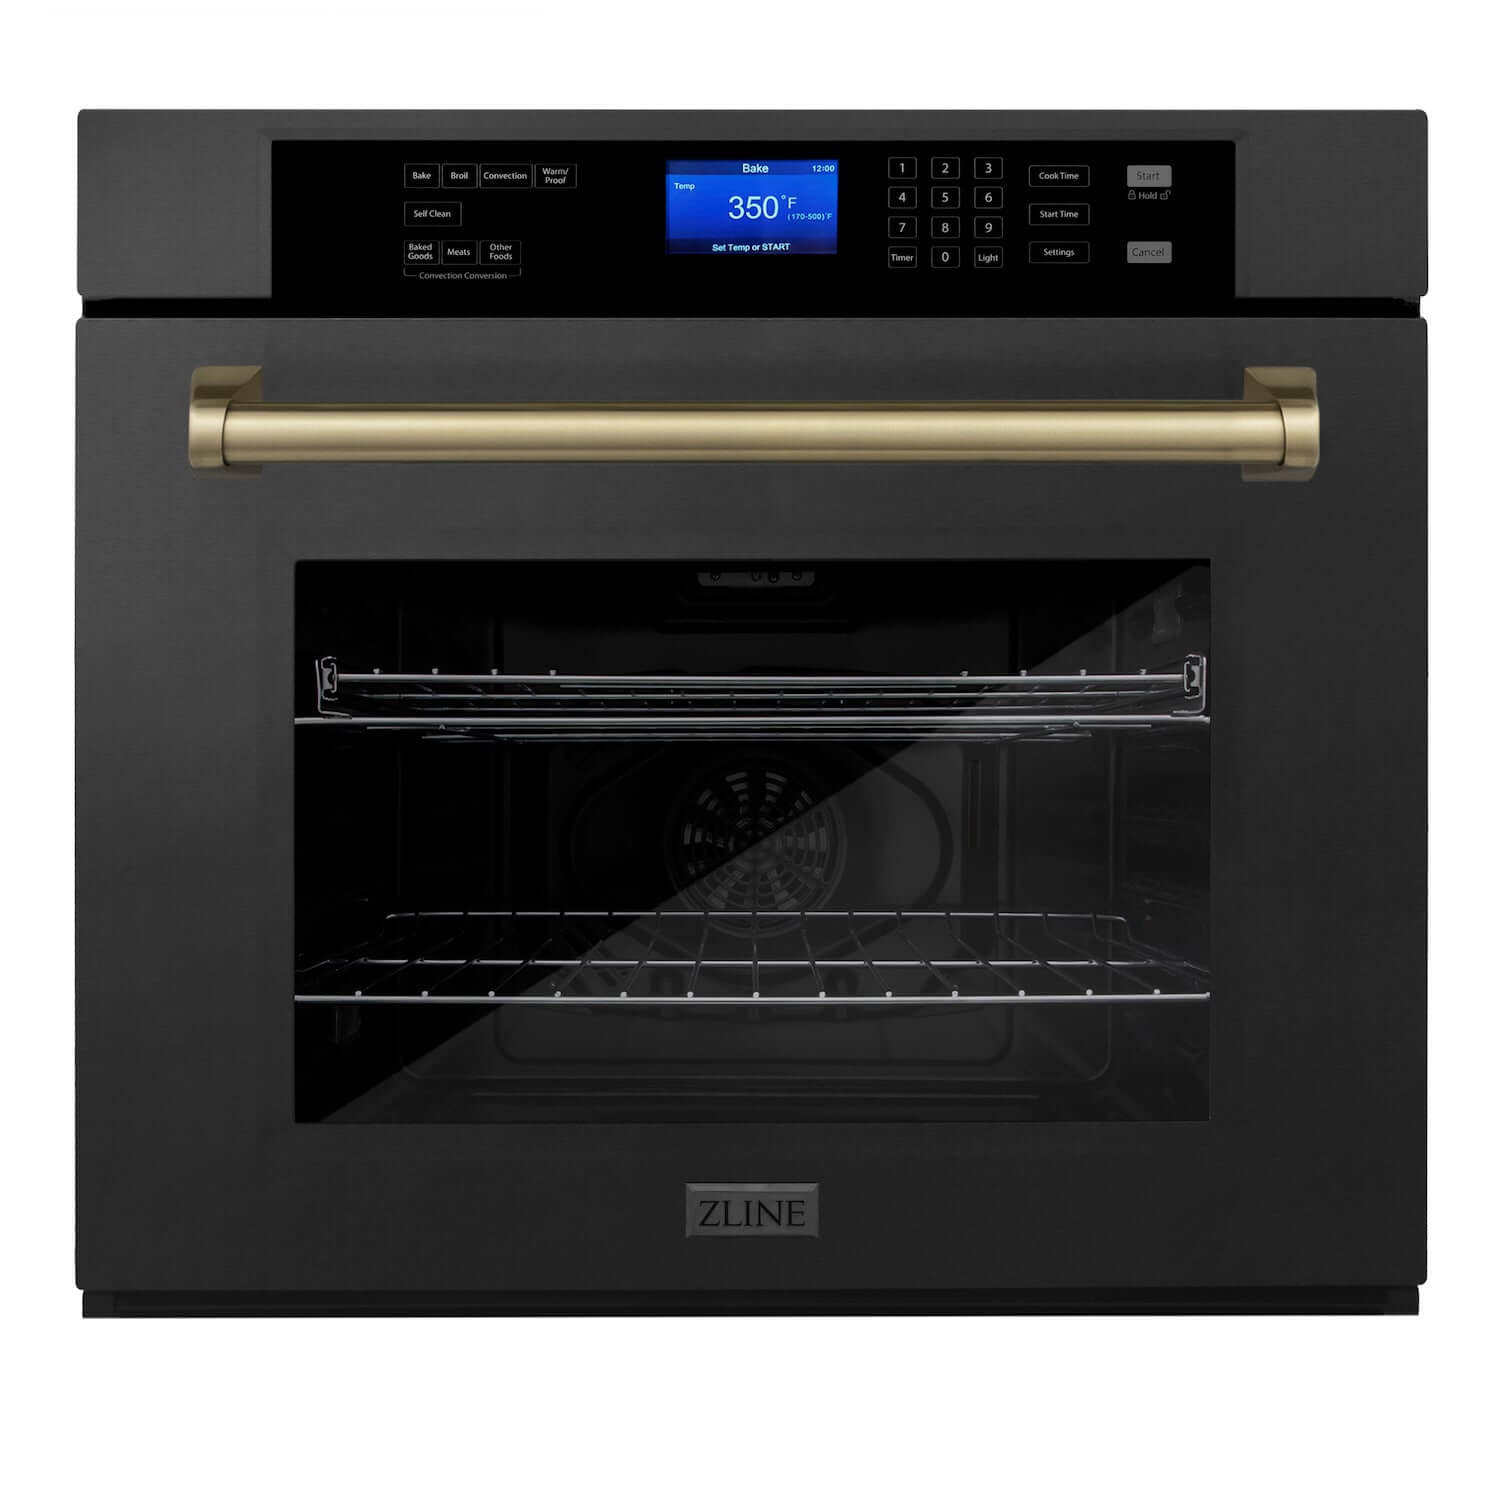 ZLINE 30 in. Autograph Edition Single Wall Oven with Self Clean and True Convection in Black Stainless Steel and Champagne Bronze Accents (AWSZ-30-BS-CB)